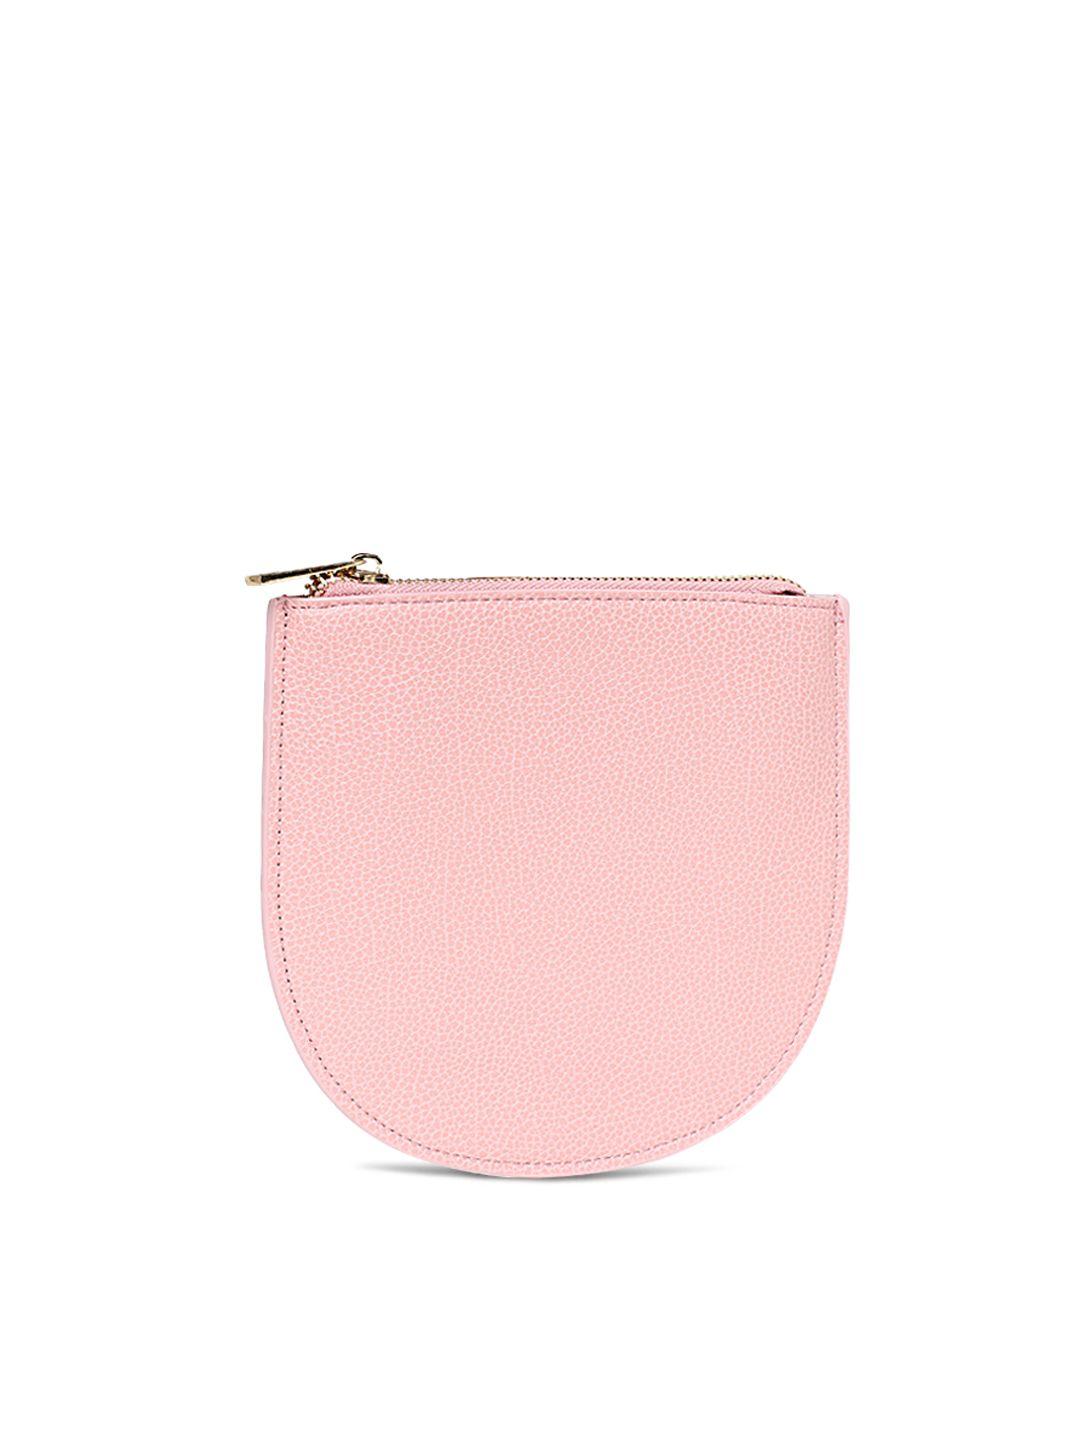 forever 21 pink solid clutch